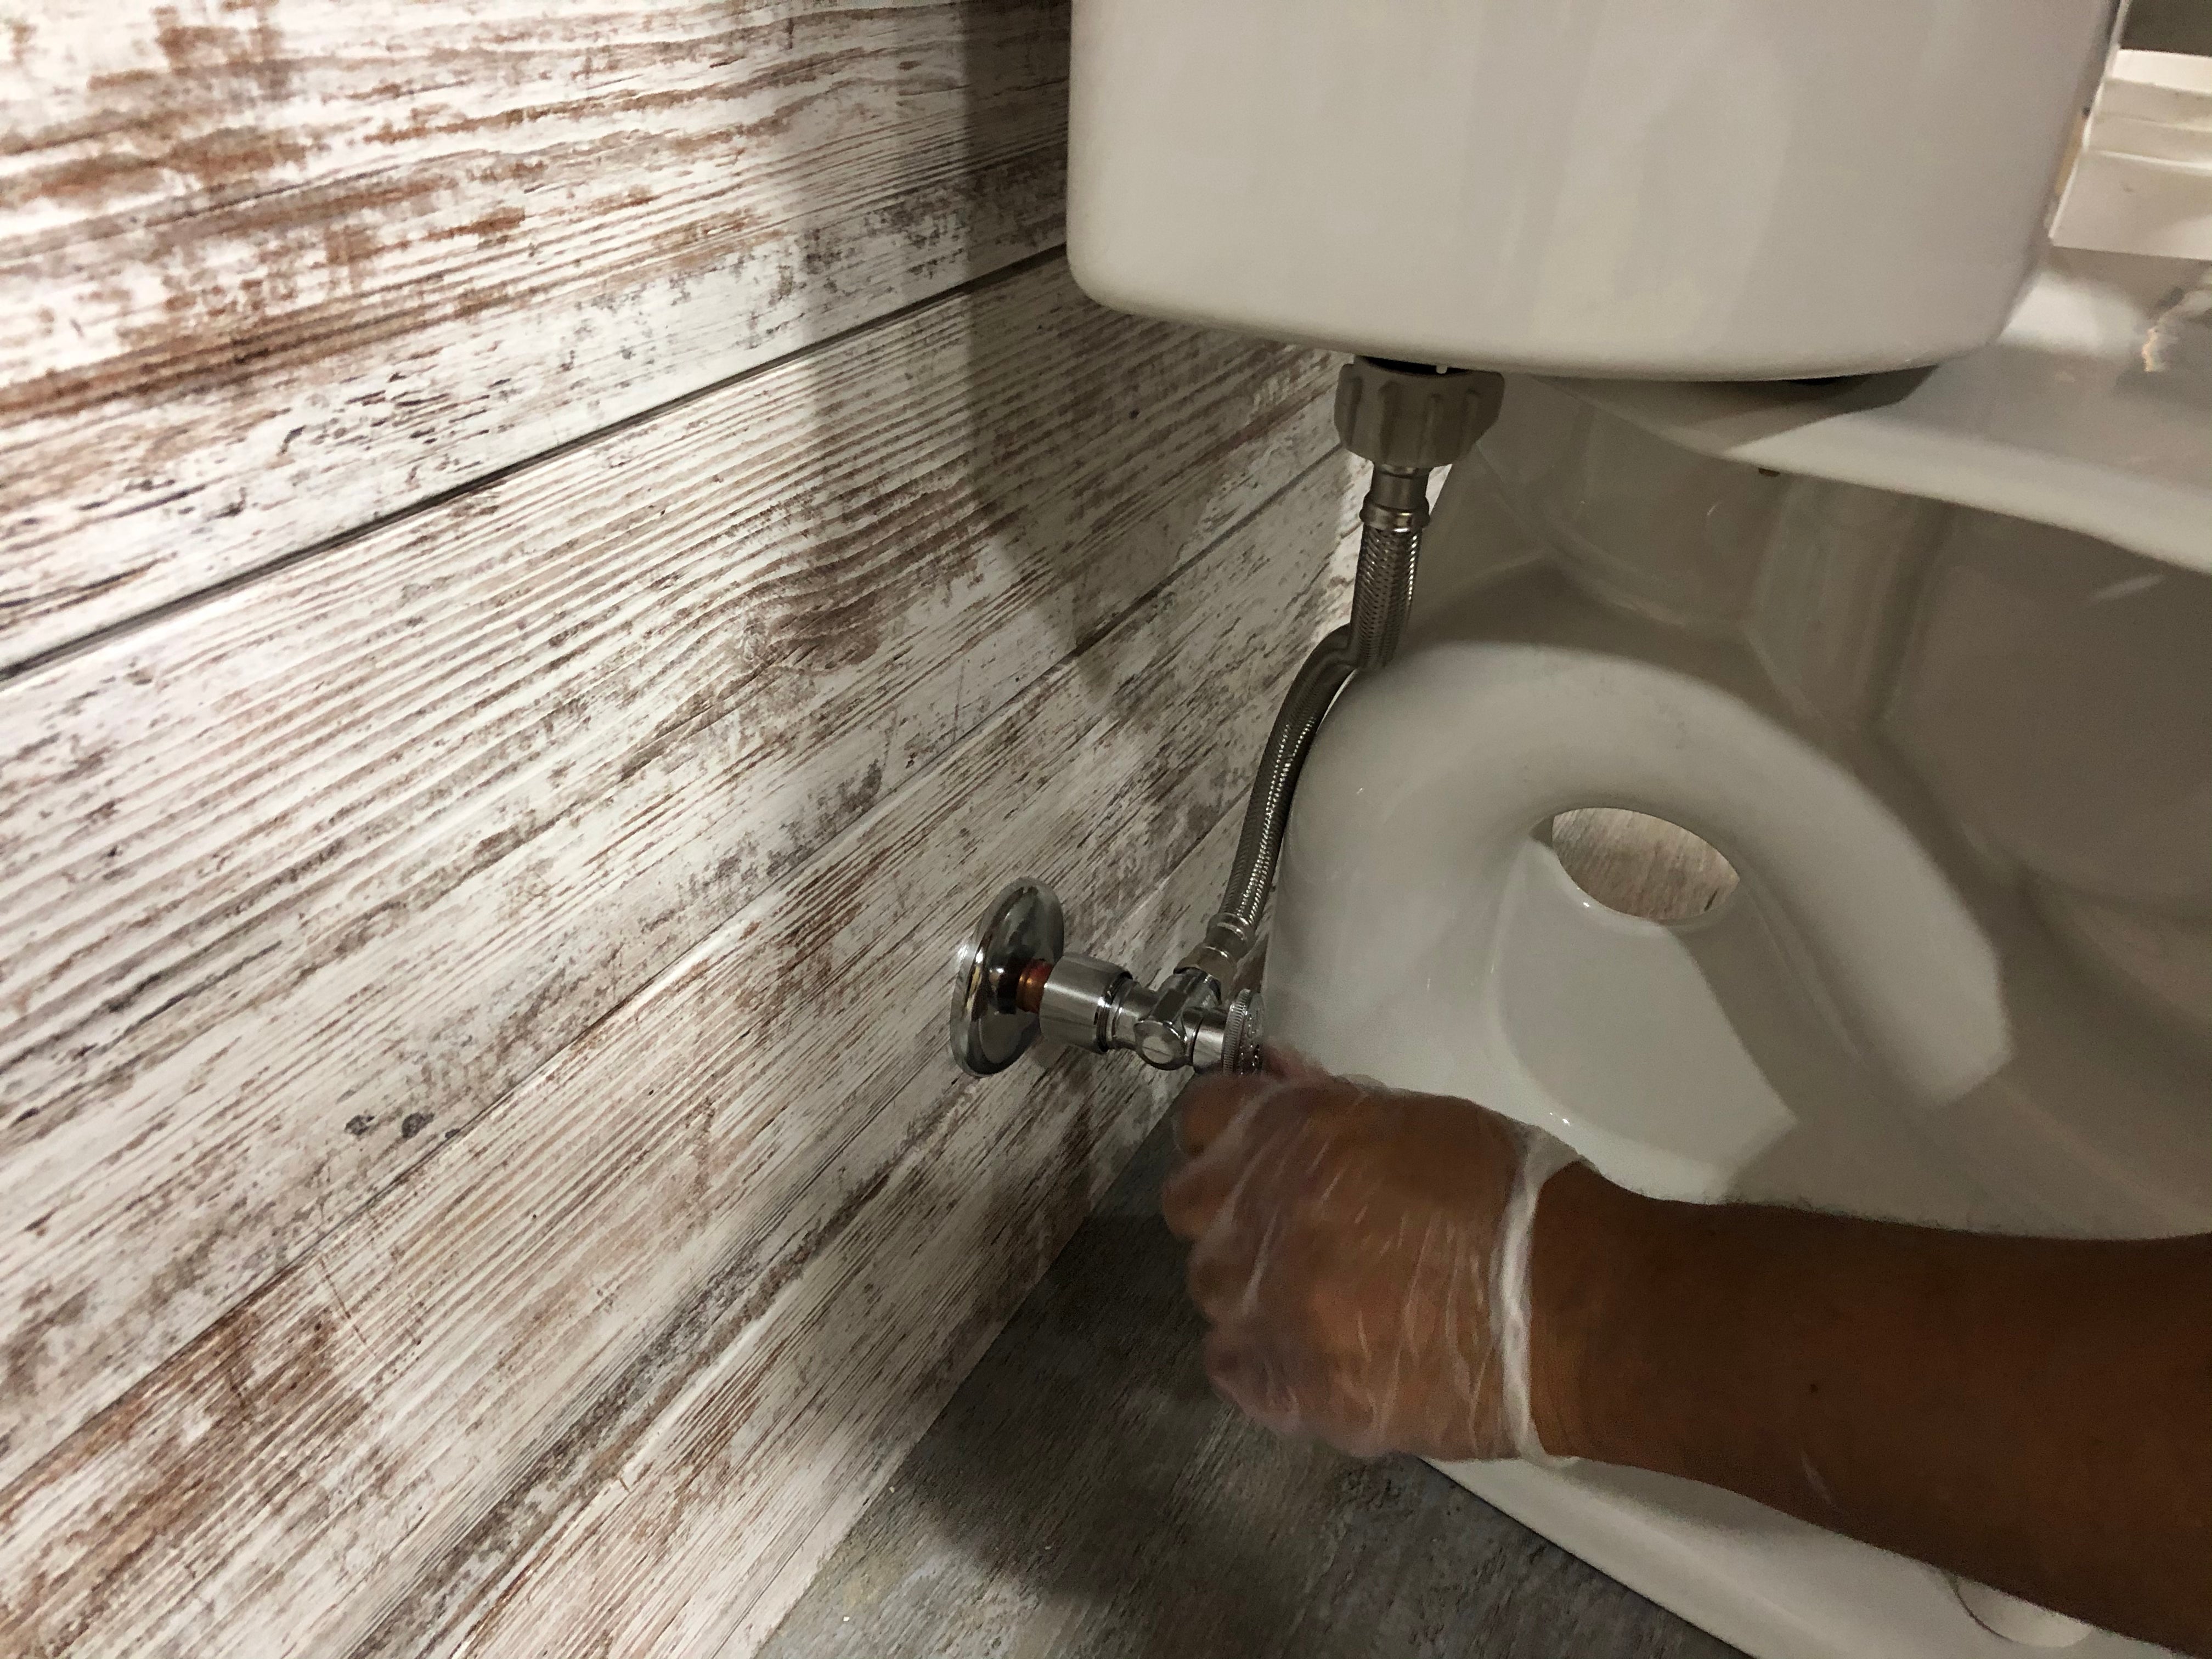 Victoria Plumbing Repair: When To Replace the Toilet Wax Ring